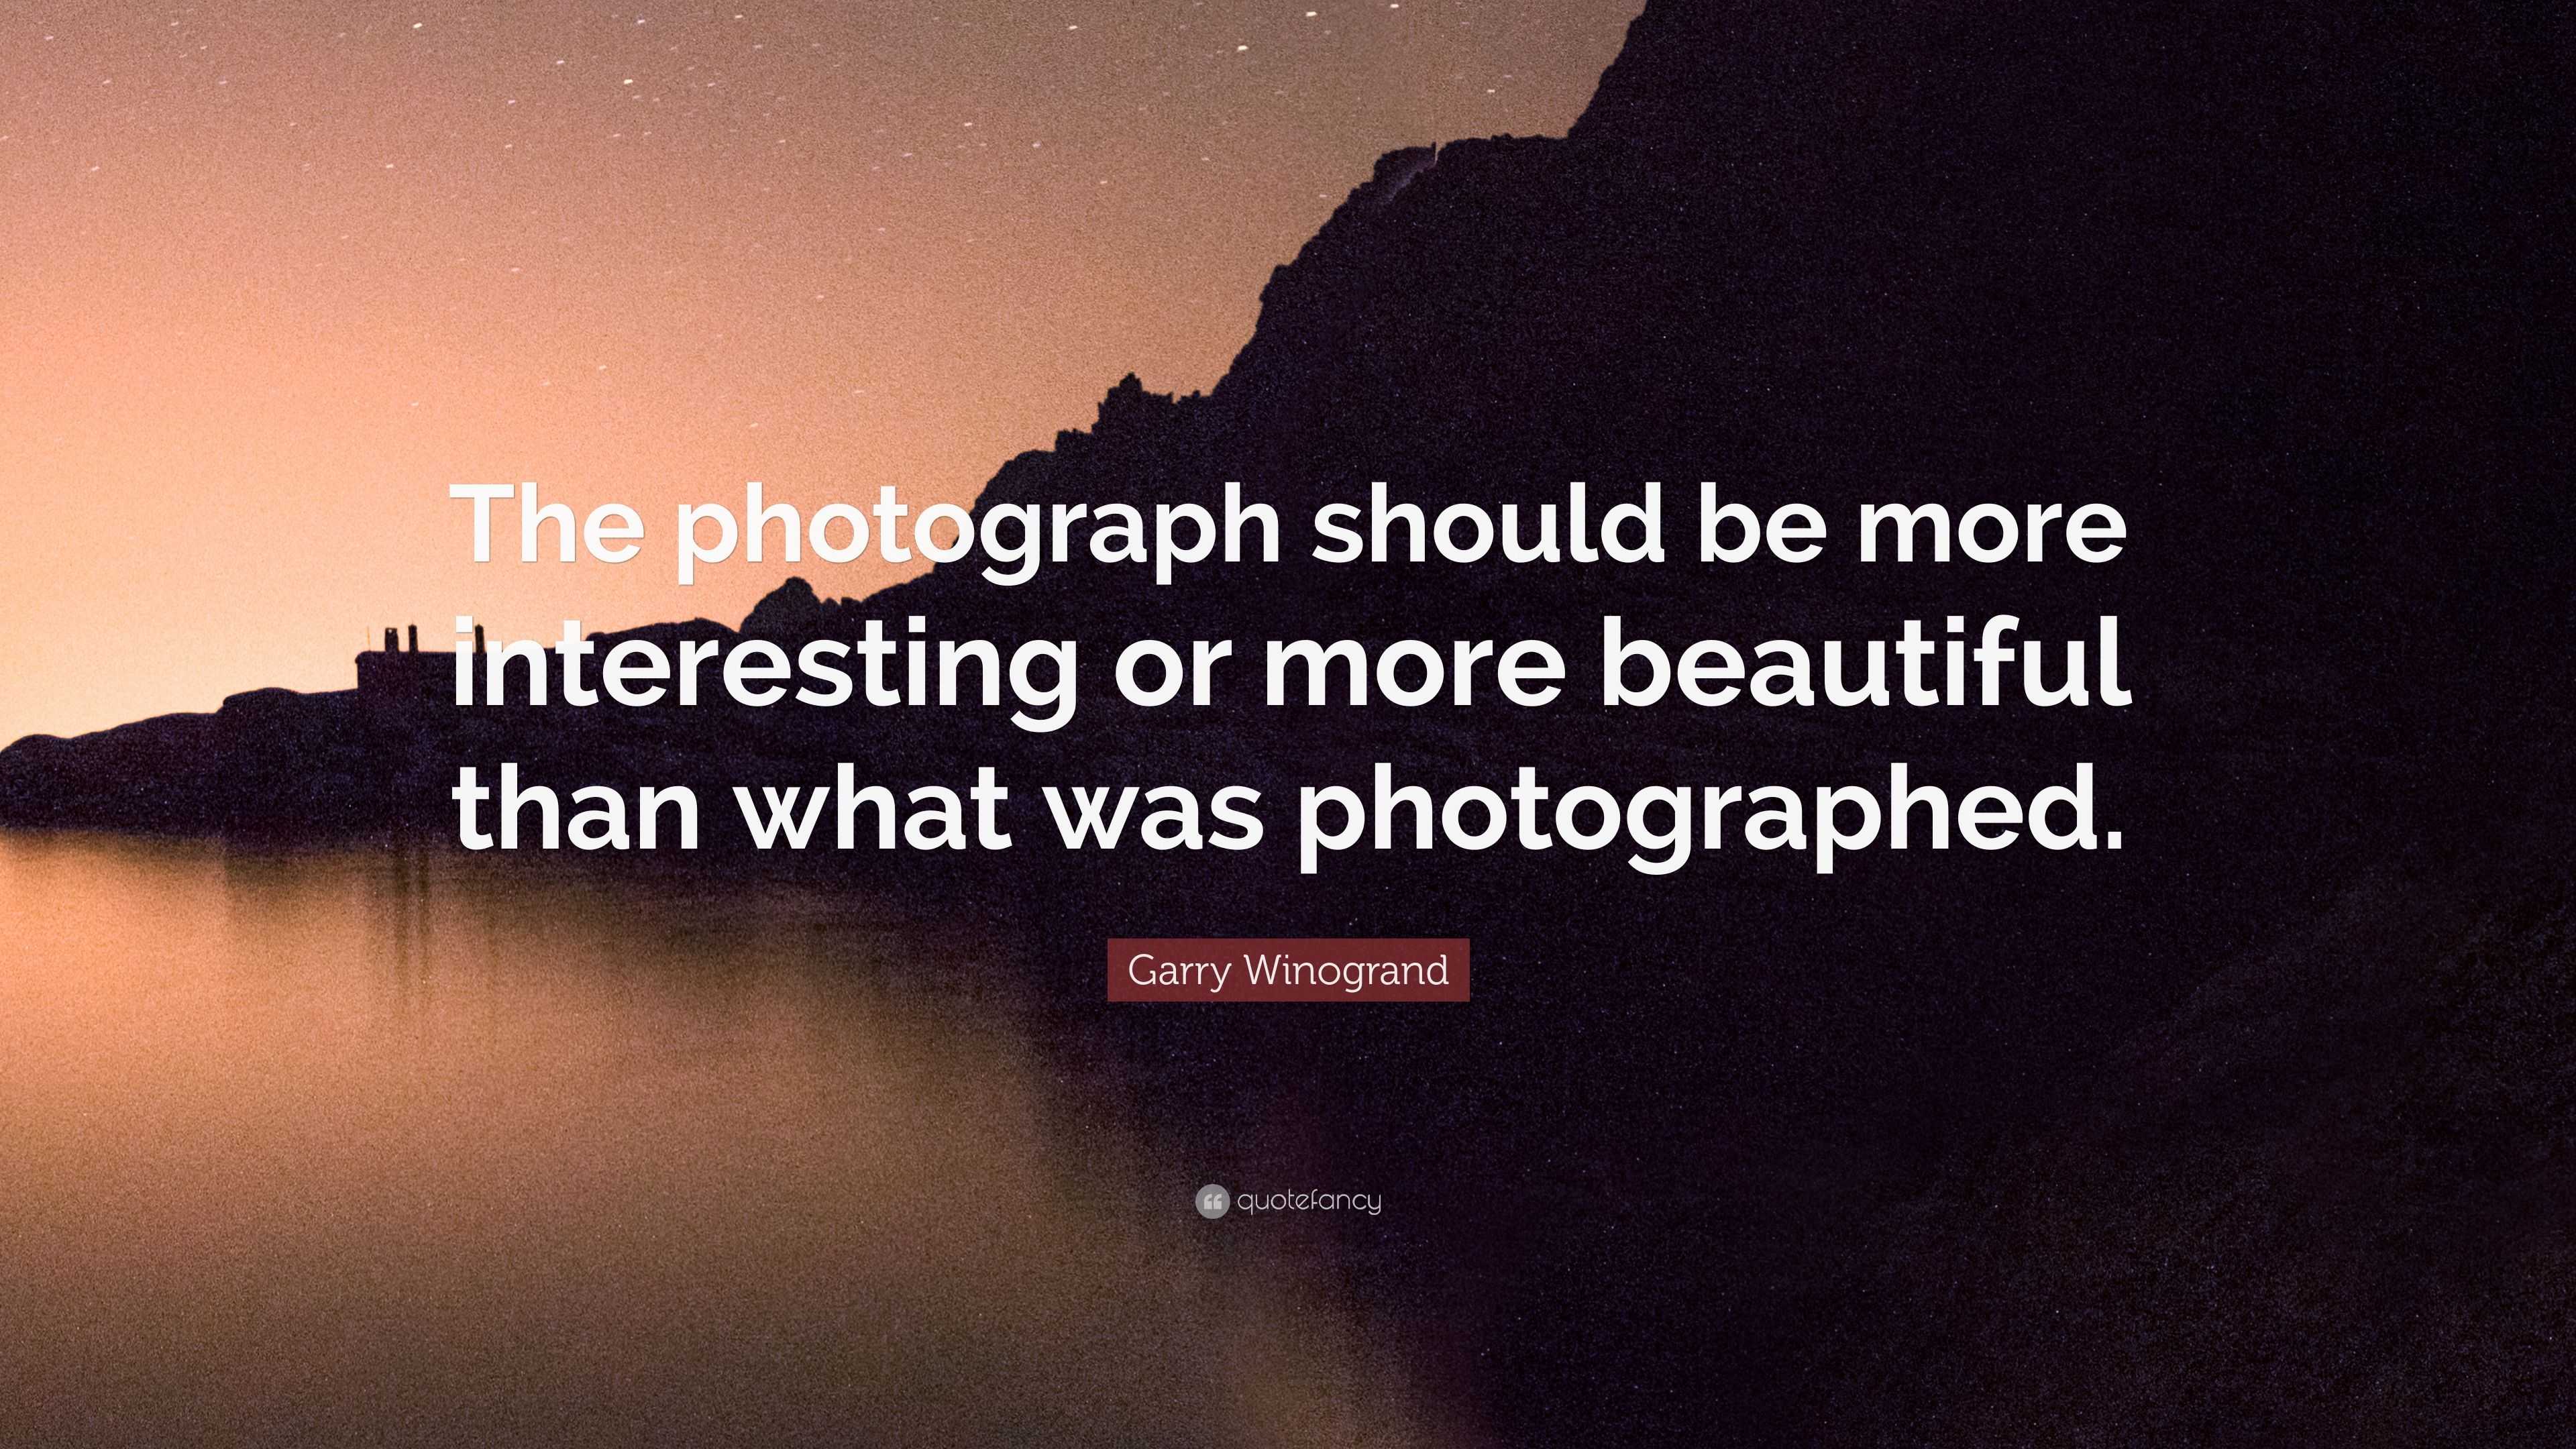 Garry Winogrand Quote: “The photograph should be more interesting or ...